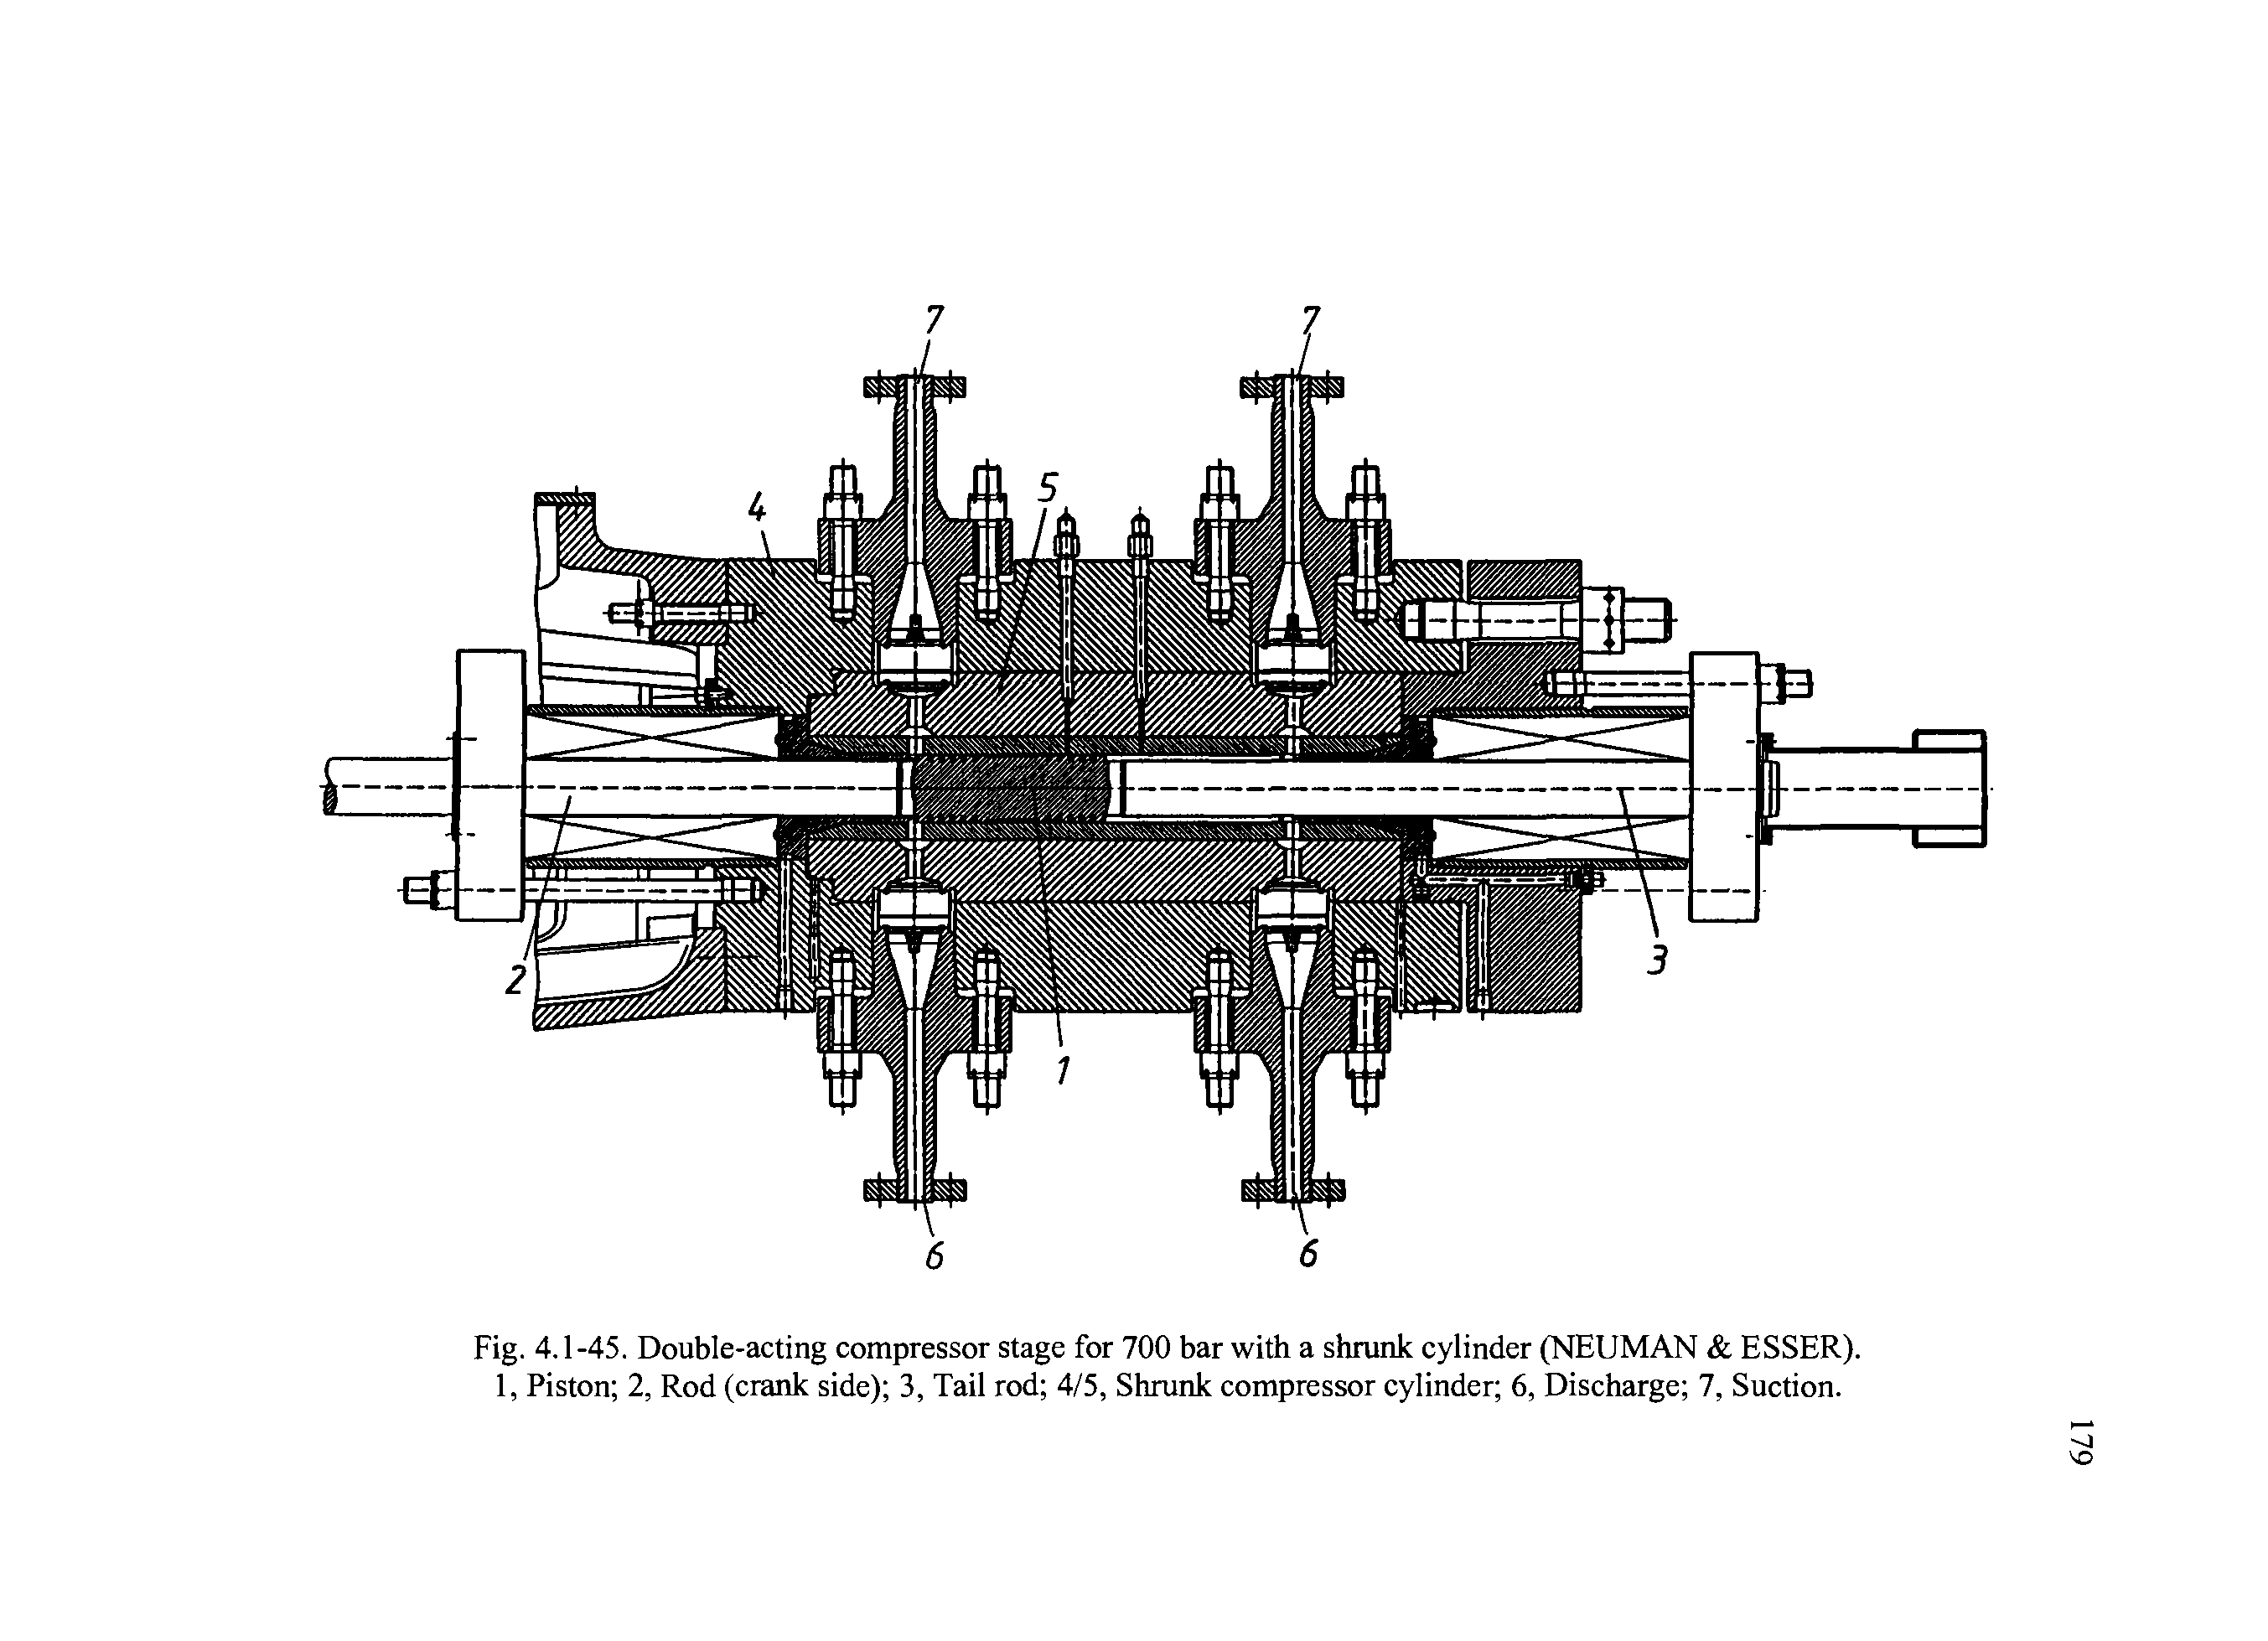 Fig. 4.1-45. Double-acting compressor stage for 700 bar with a shrunk cylinder (NEUMAN ESSER). 1, Piston 2, Rod (crank side) 3, Tail rod 4/5, Shrunk compressor cylinder 6, Discharge 7, Suction.